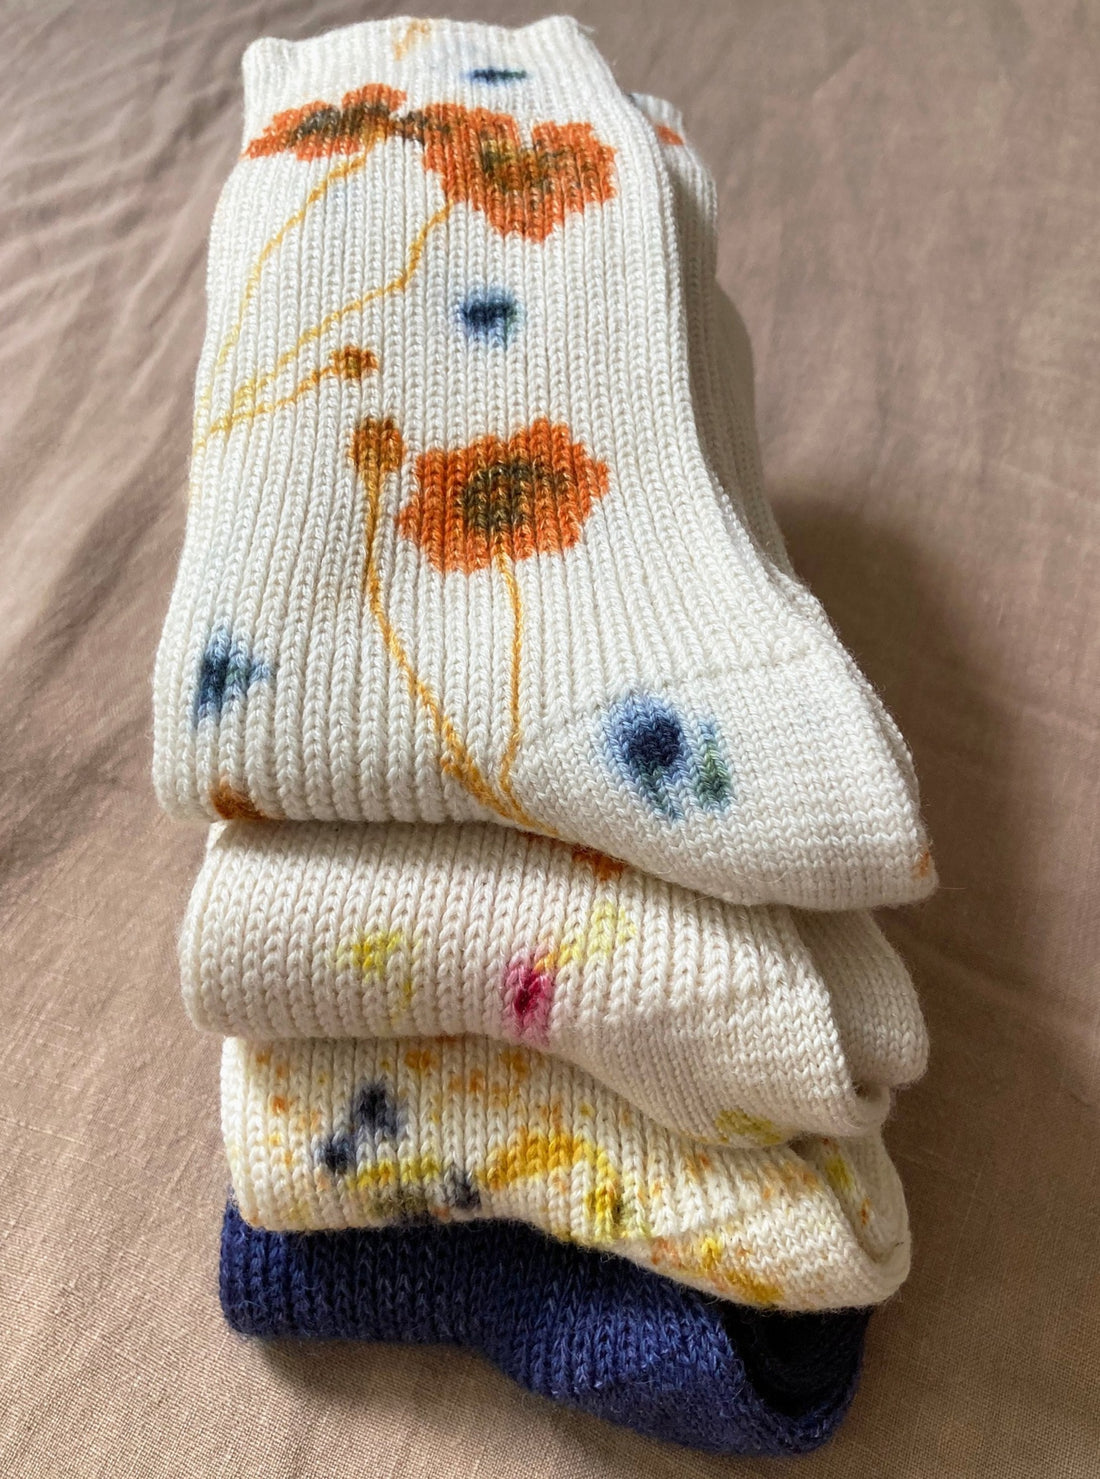 Floral print wool, hemp and cotton socks by Marie-les-bains